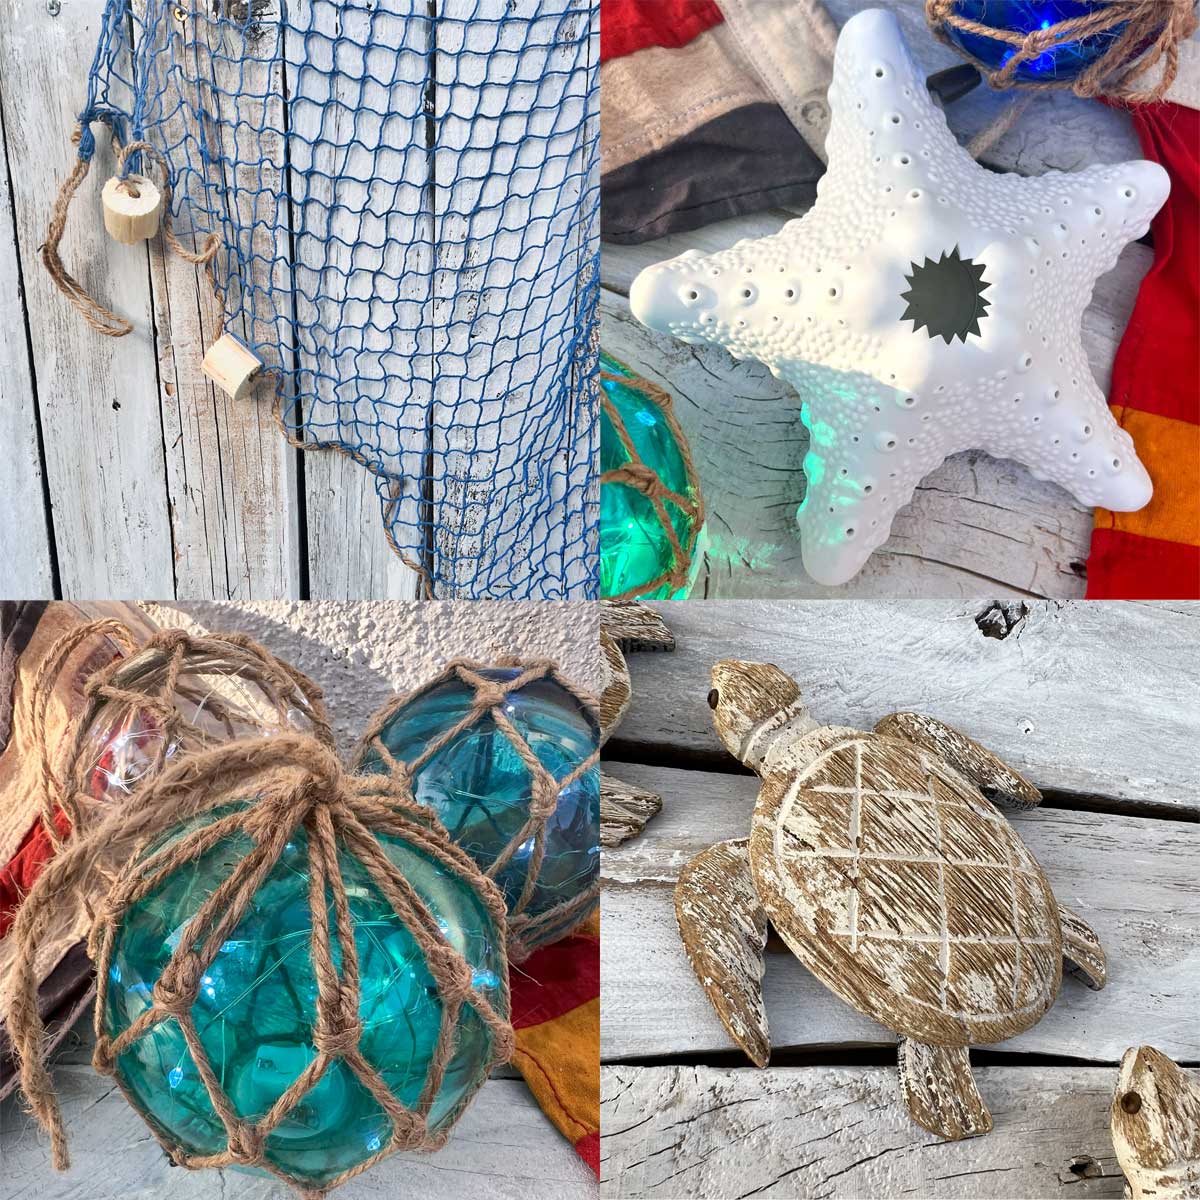 This image is a of a selection of nautical Tiki Bar decoration. It includes a Ceramic tea light holder shaped like a starfish, a decorative fishing net, a drift wood turtle and battery operated fish float lights